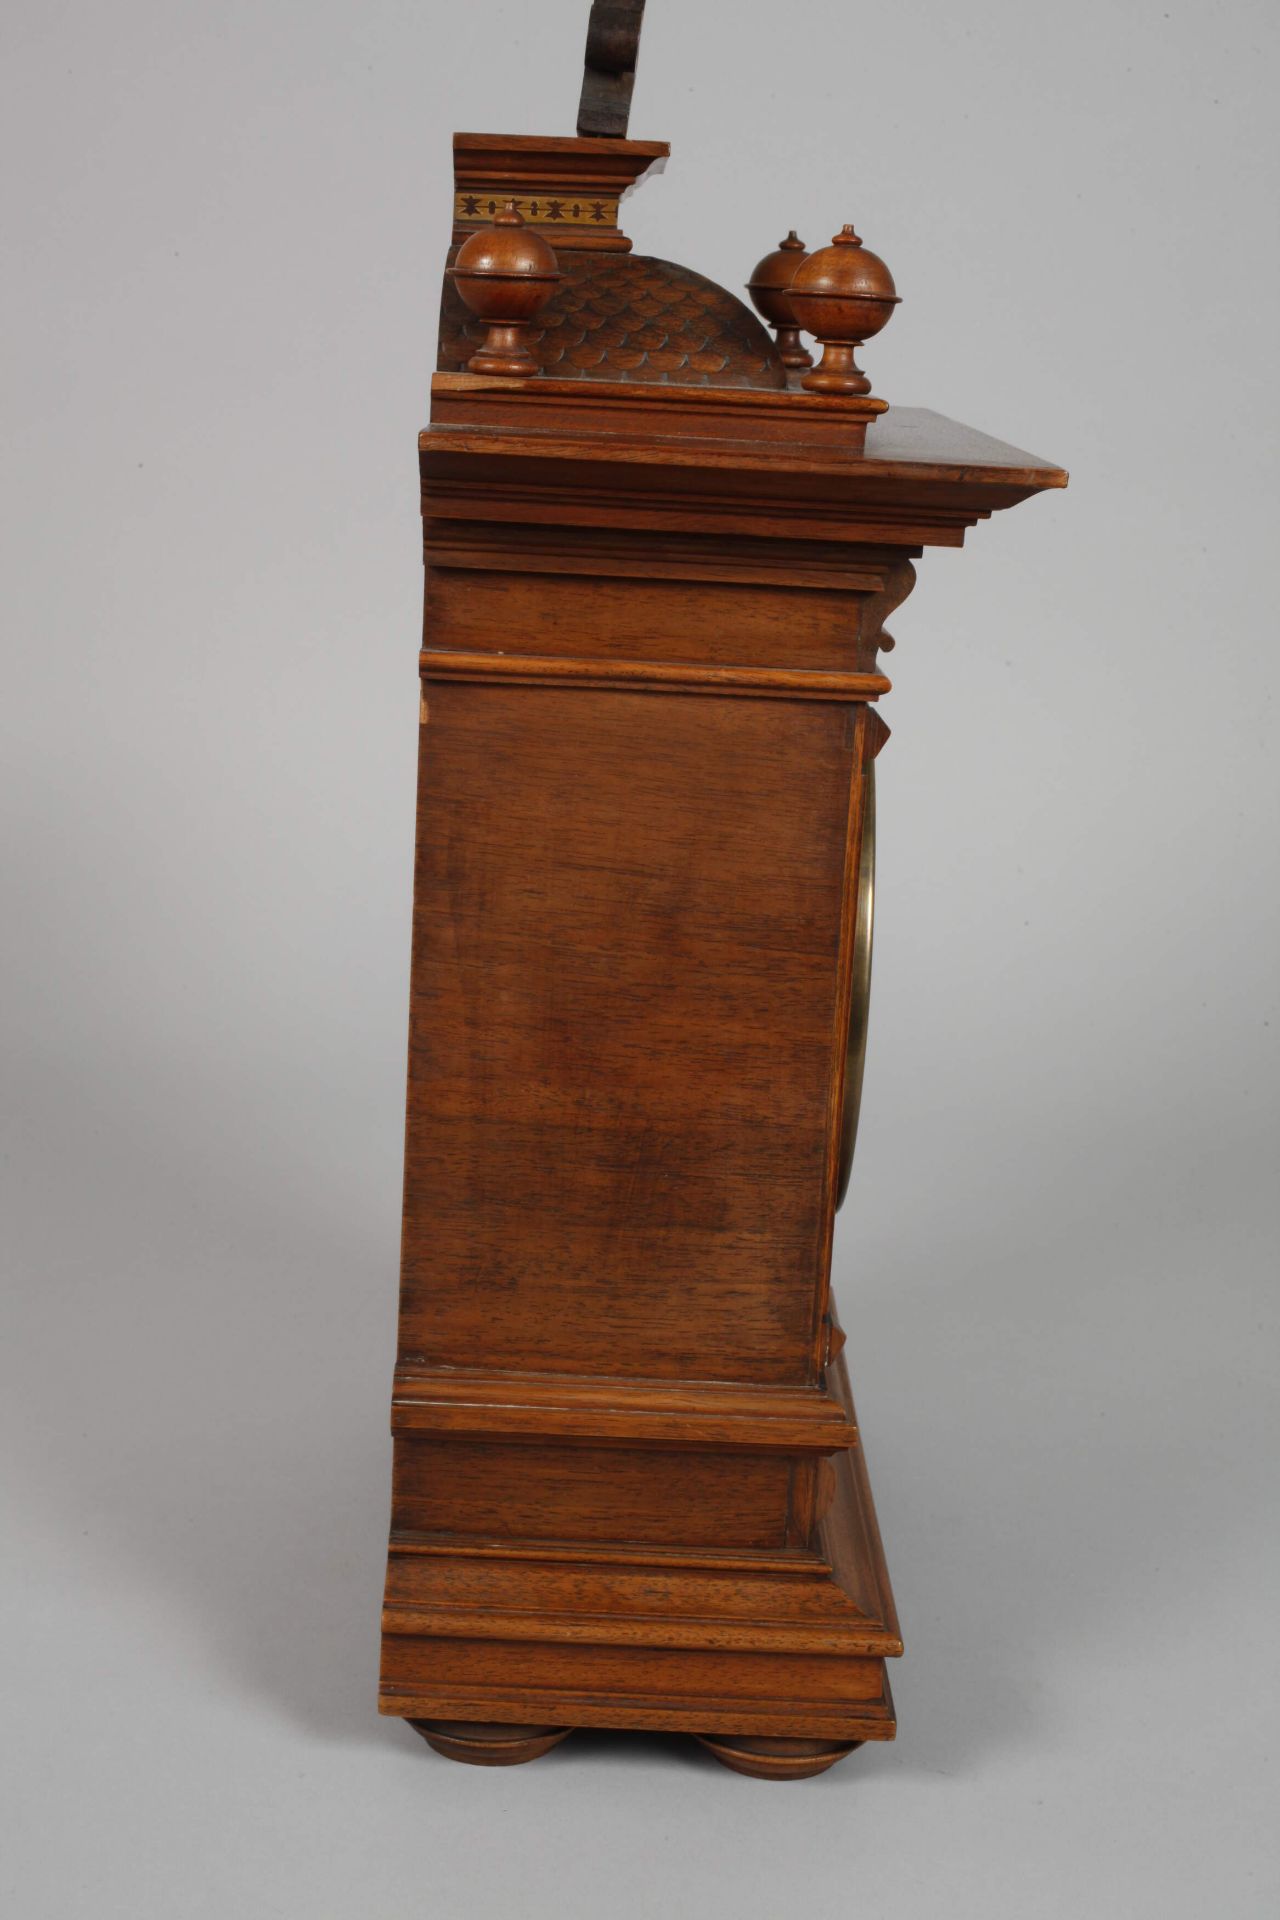 Founding period table clock LFS - Image 4 of 8